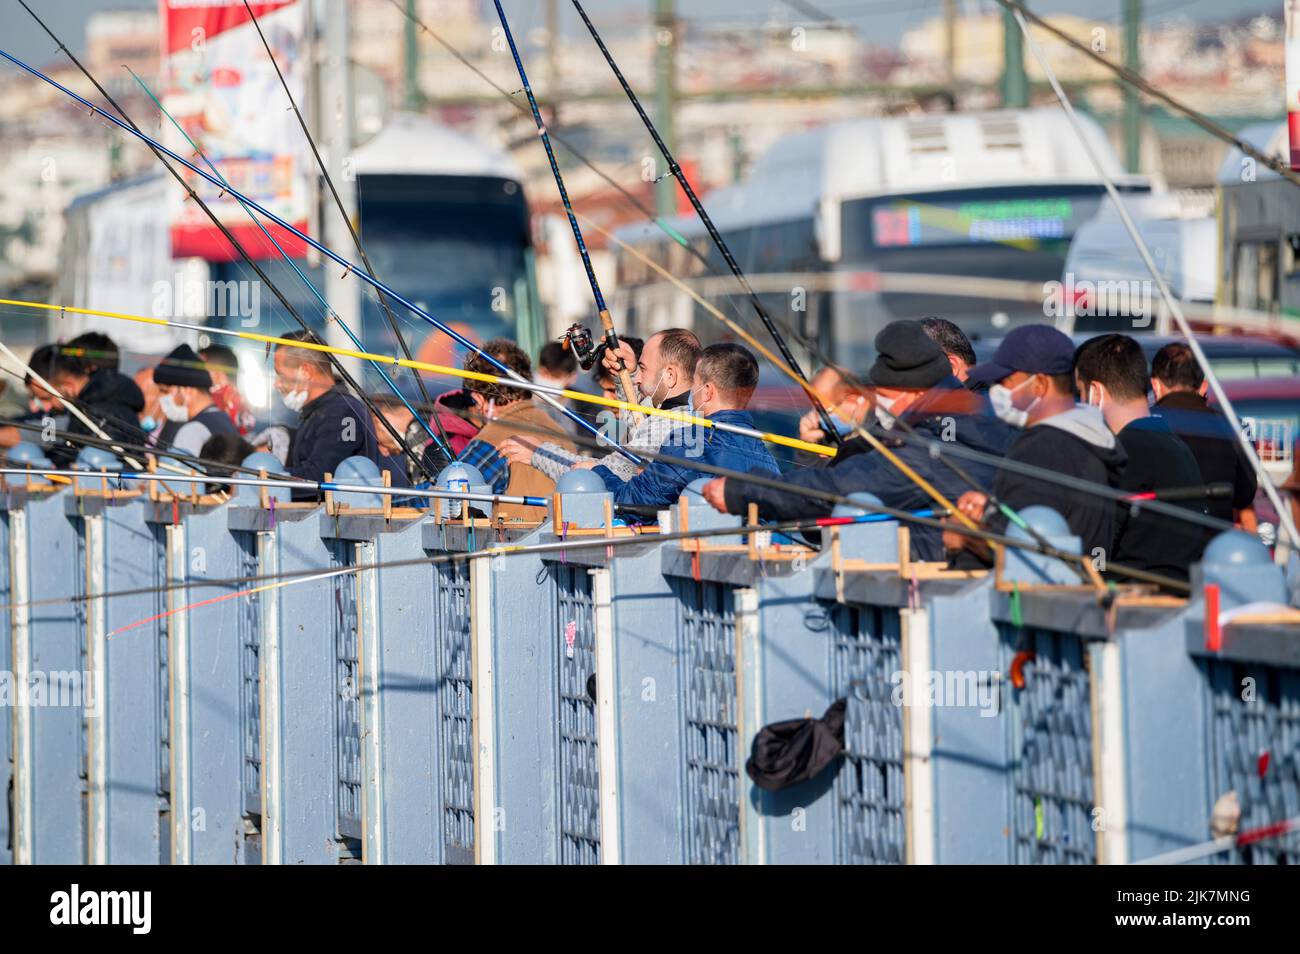 ISTANBUL, TURKEY - 9 DECEMBER 2020: People fish from the Galata bridge in Istanbul. The bridge is well known for rod fishing at sunset. Stock Photo